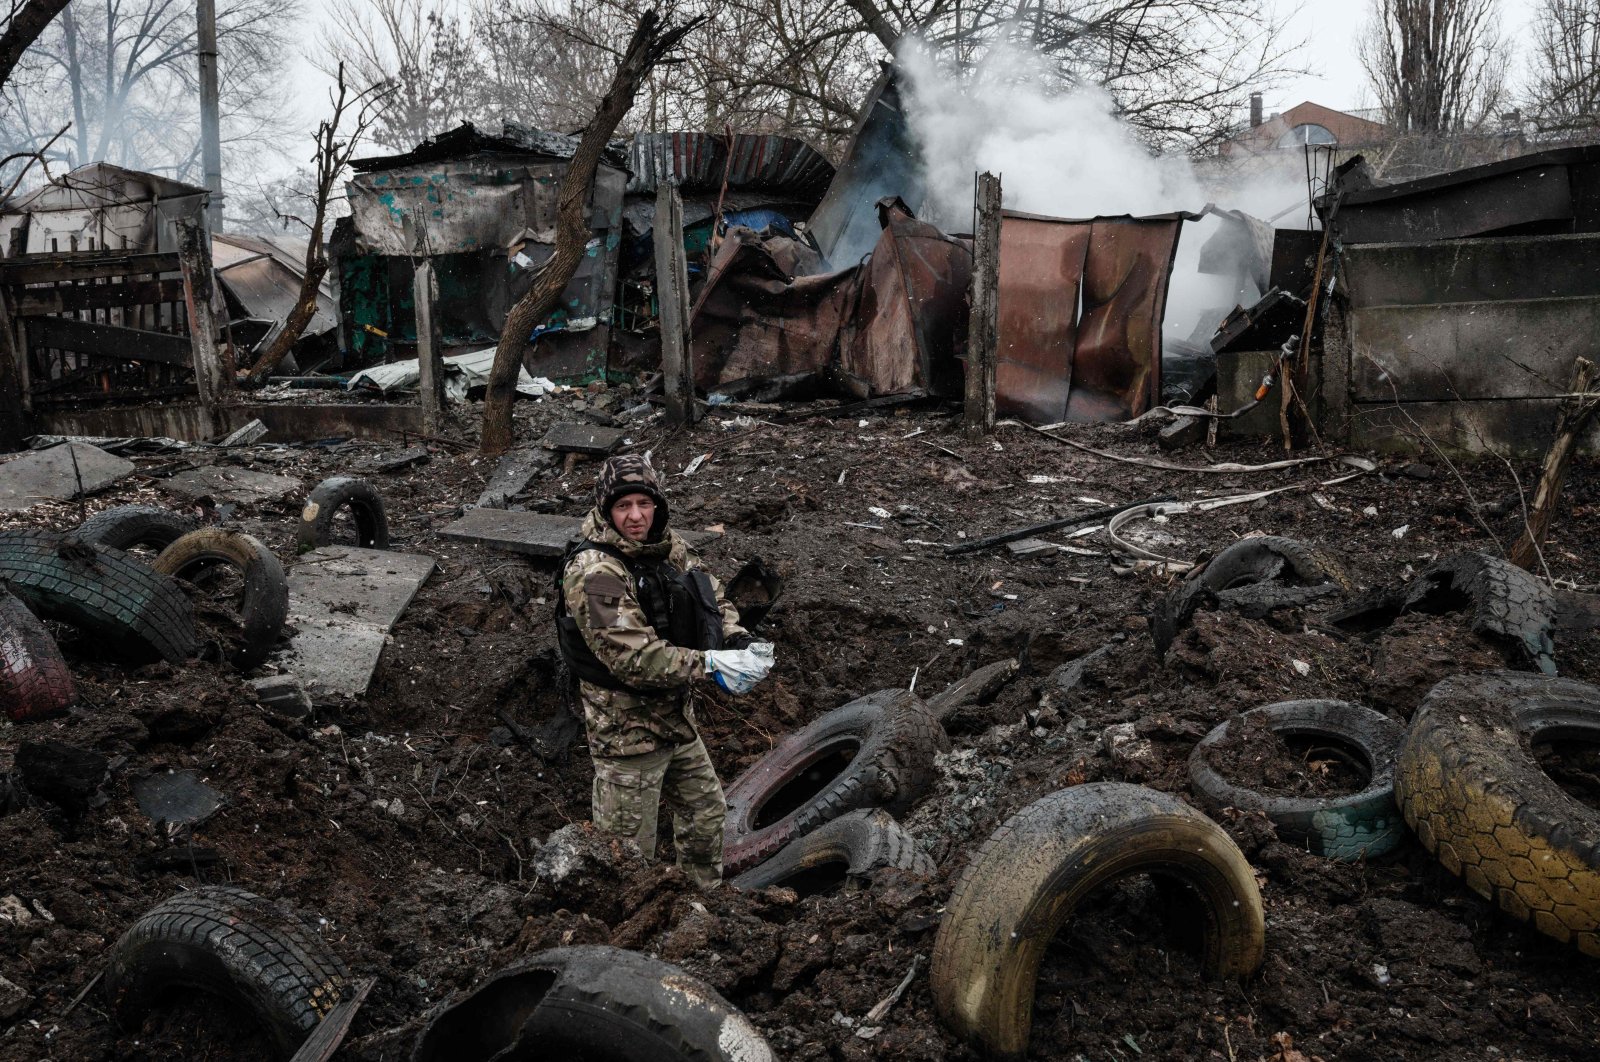 A police officer inspects a hole after a rocket strike, in Kramatorsk, Ukraine, February 2, 2023, amid the Russian invasion of Ukraine. (AFP Photo)